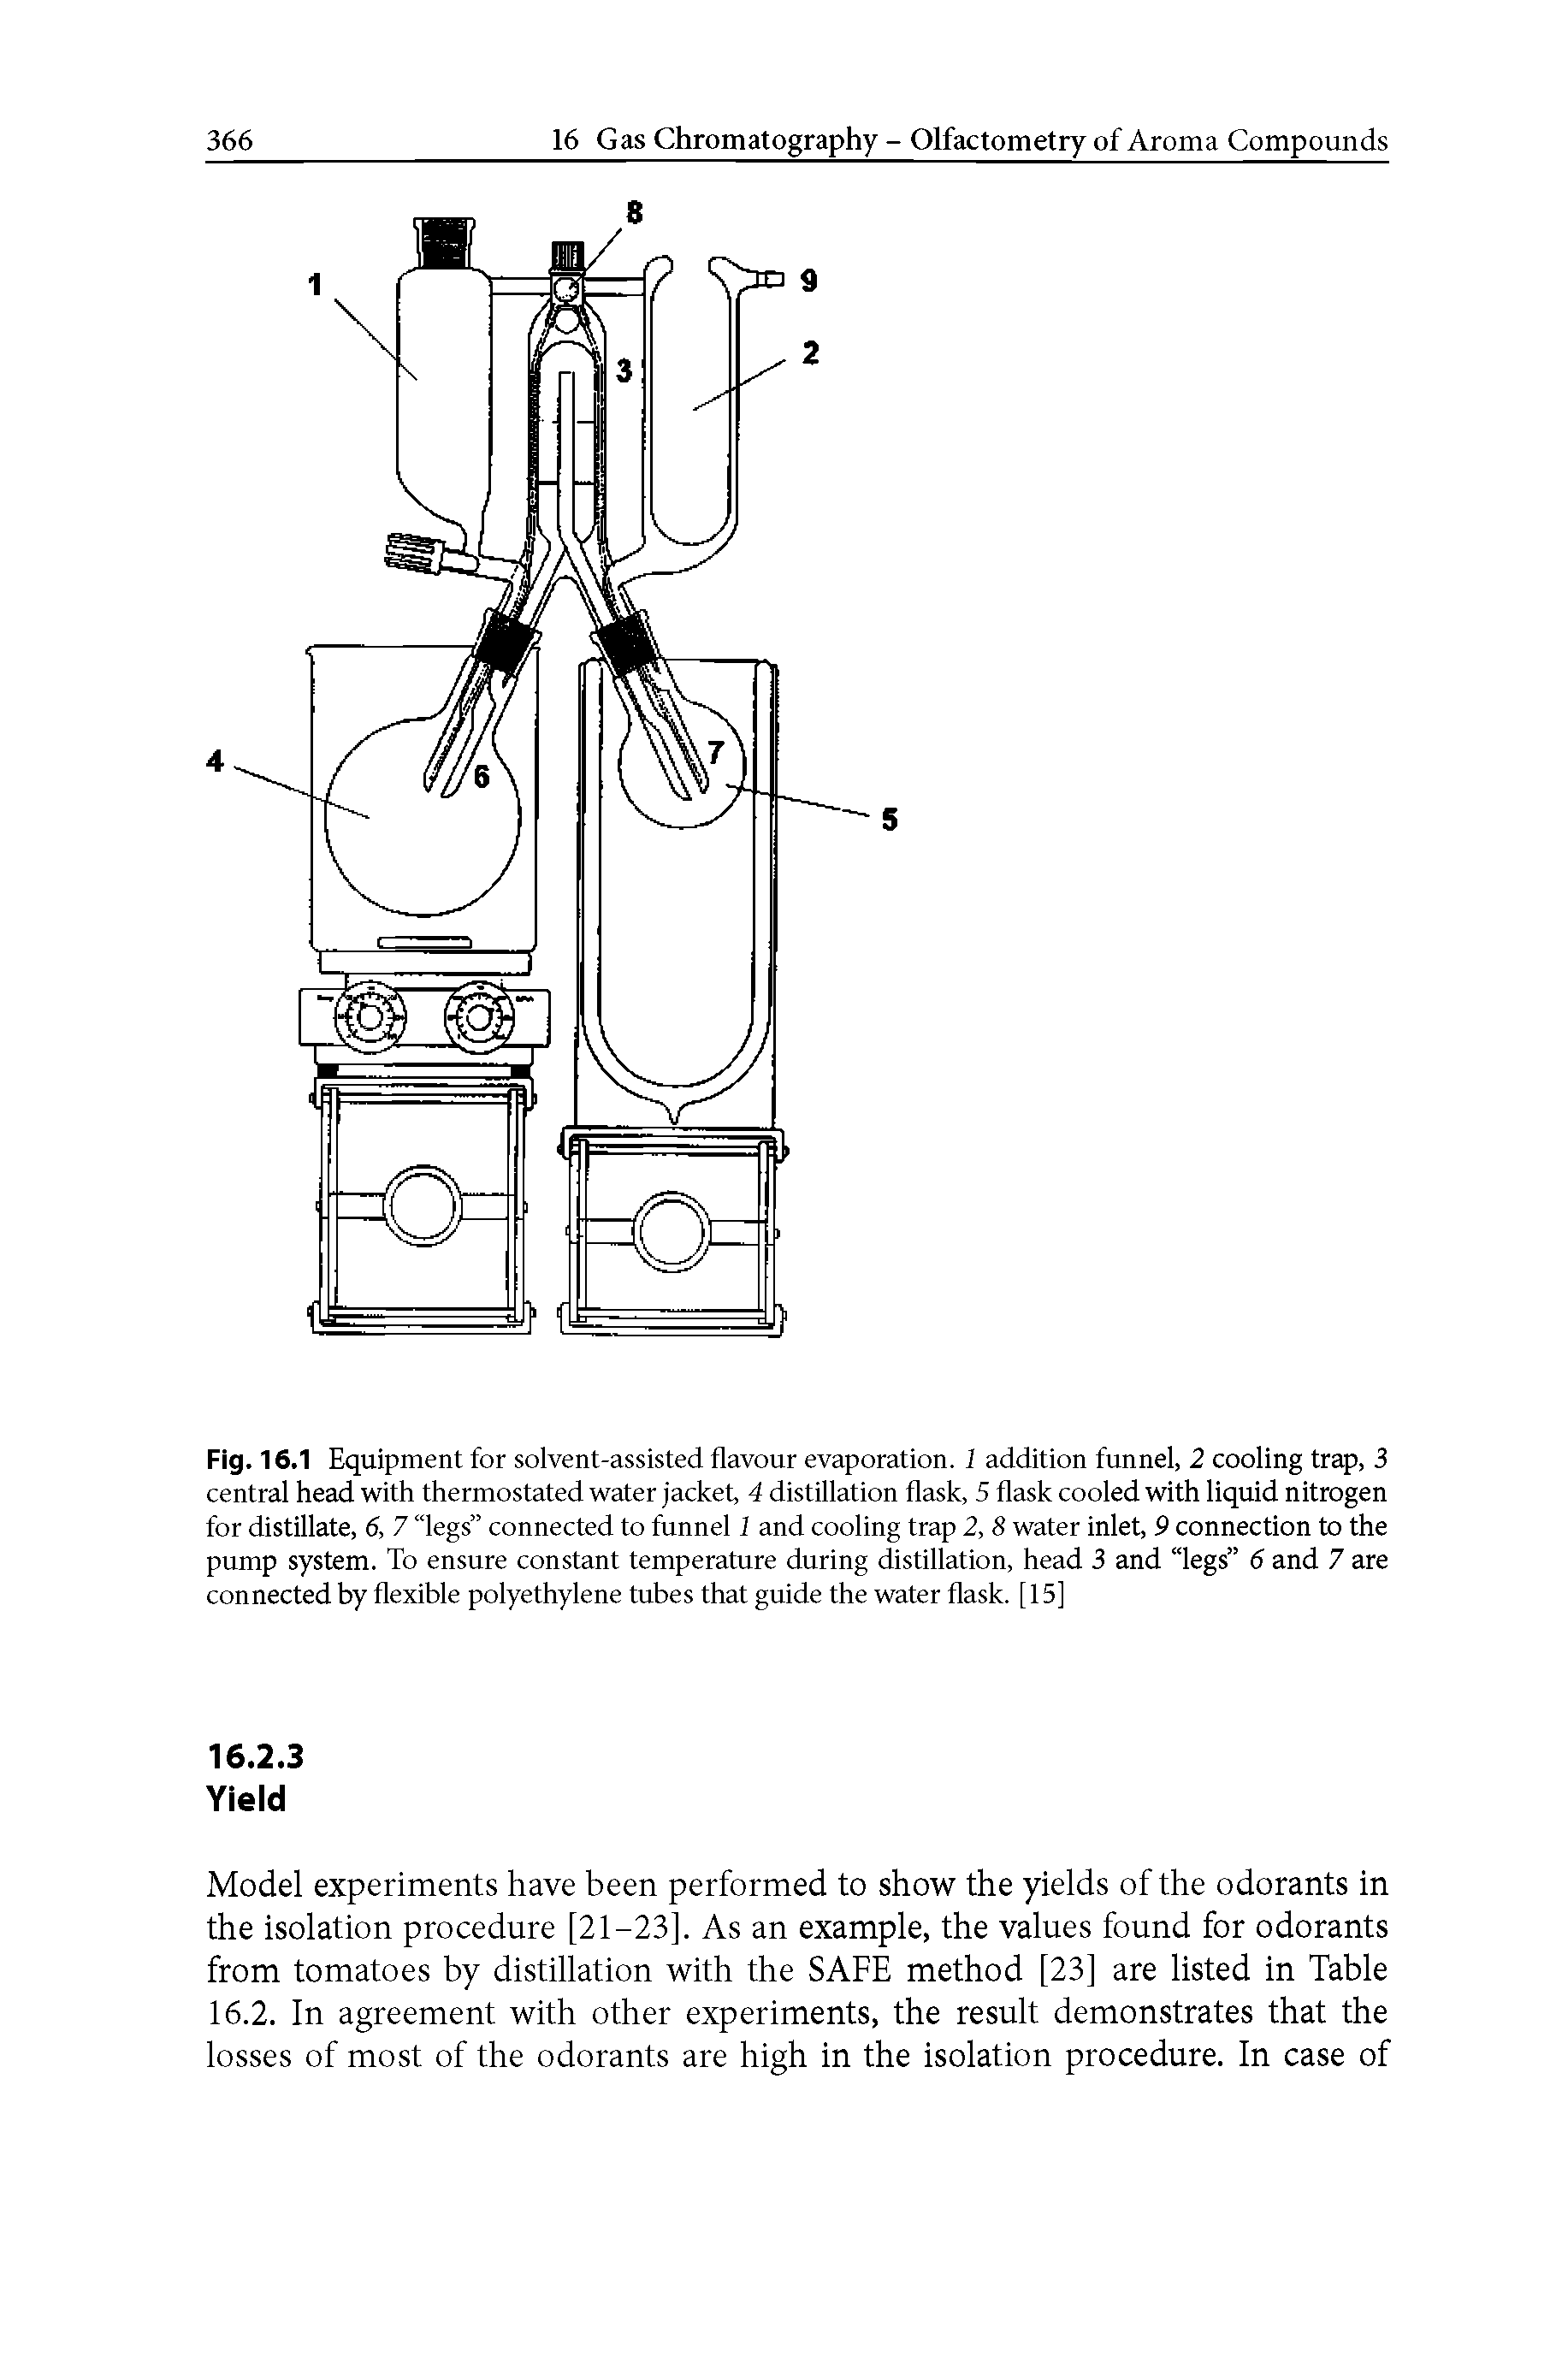 Fig. 16.1 Equipment for solvent-assisted flavour evaporation. 1 addition funnel, 2 cooling trap, 3 central head with thermostated water jacket, 4 distillation flask, 5 flask cooled with liquid nitrogen for distillate, 6, 7 legs connected to funnel 1 and cooling trap 2, 8 water inlet, 9 connection to the pump system. To ensure constant temperature during distillation, head 3 and legs 6 and 7 are connected by flexible polyethylene tubes that guide the water flask. [15]...